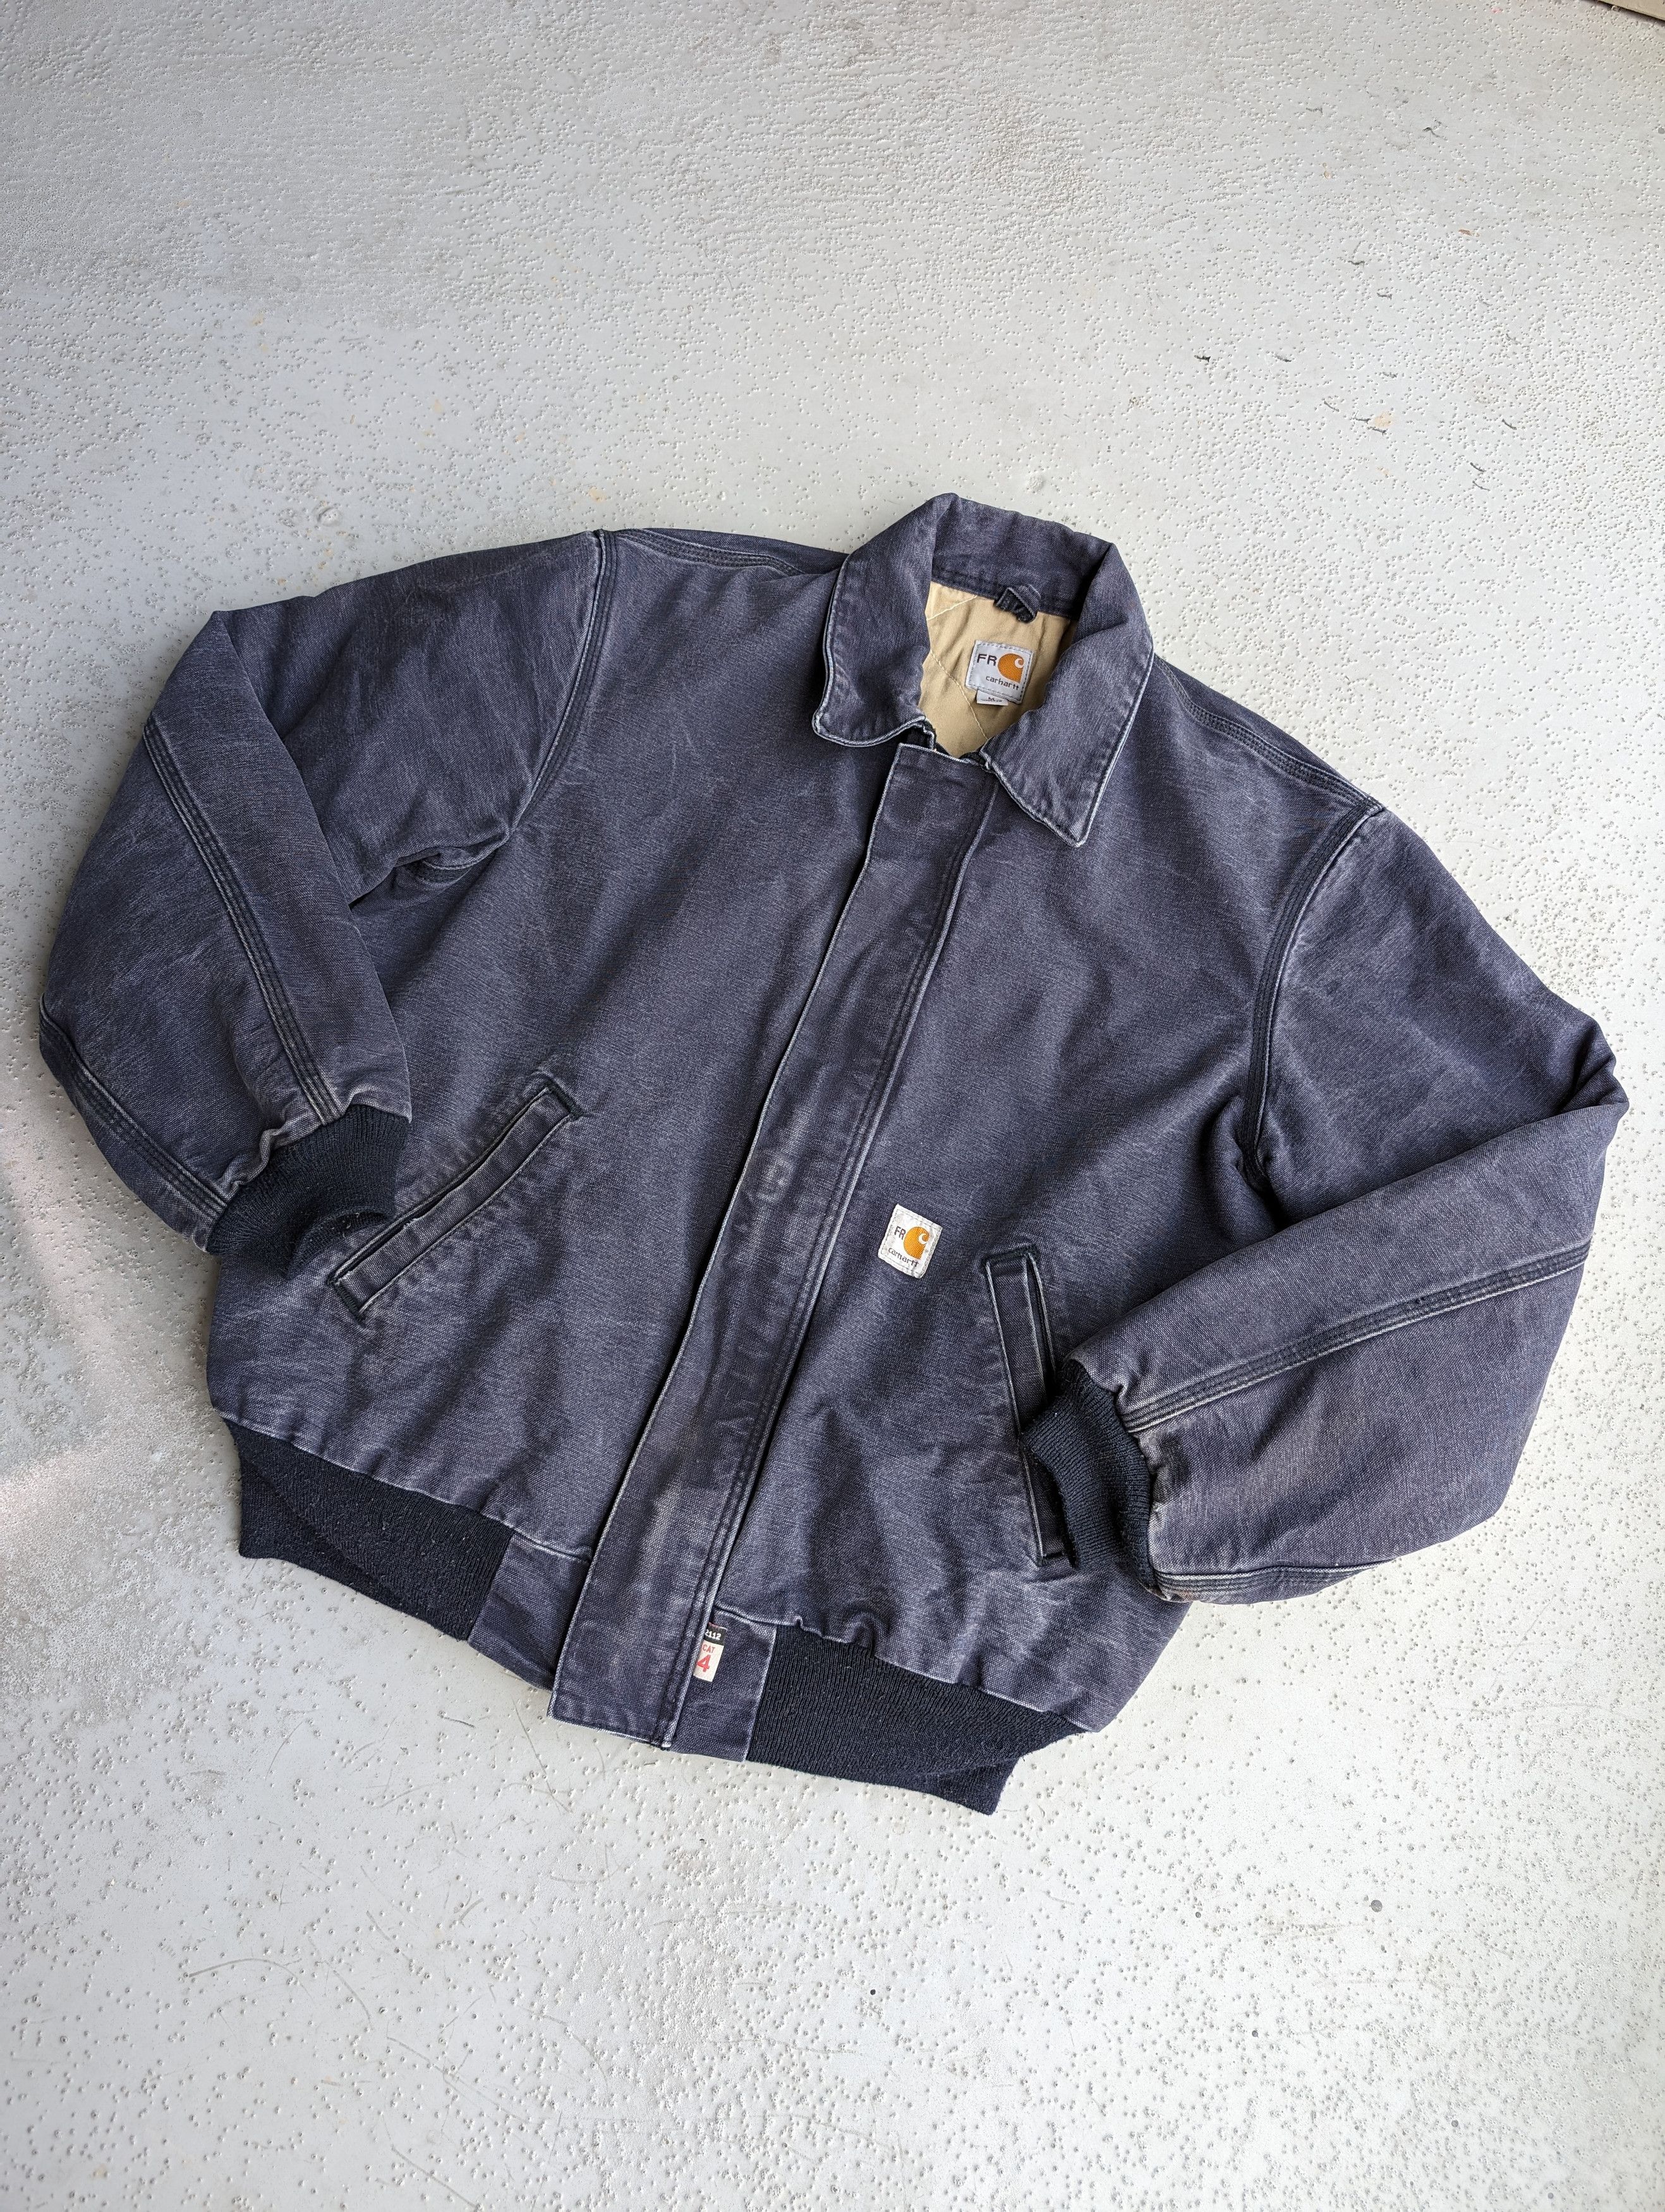 Pre-owned Carhartt X Vintage 90's Carhartt Chore Faded Navy Work Jacket